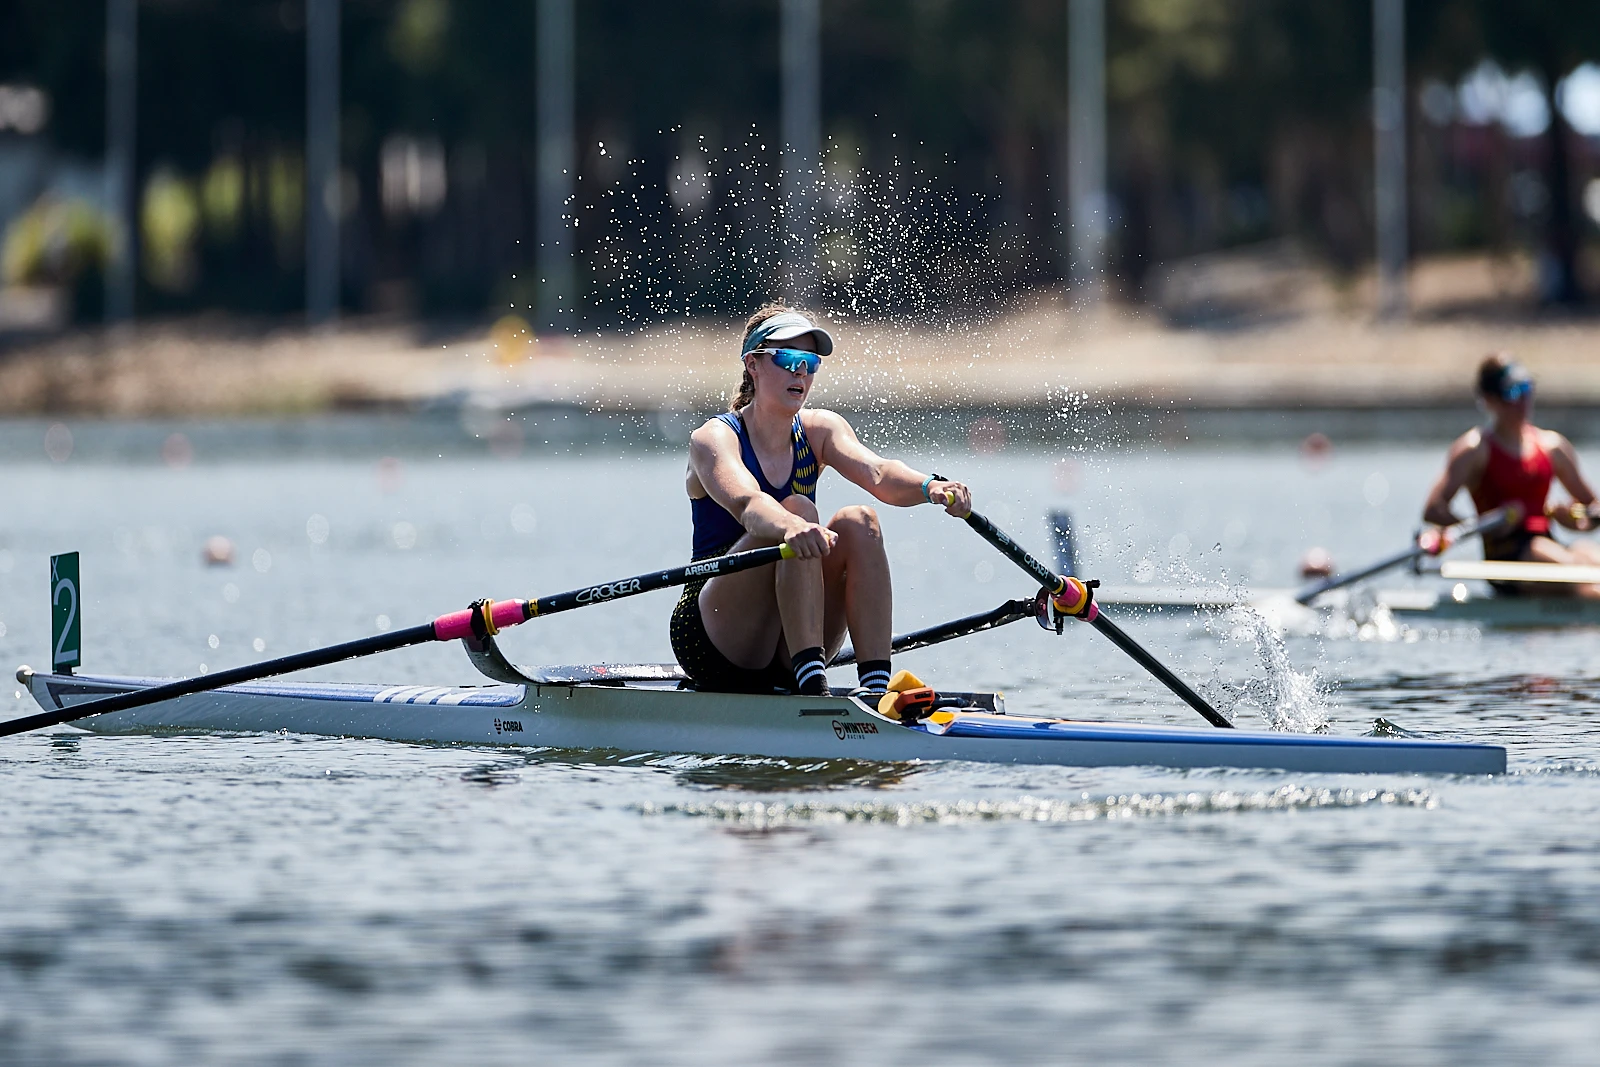 PWP - Rowing NSW Flickr images, 20230210 0094